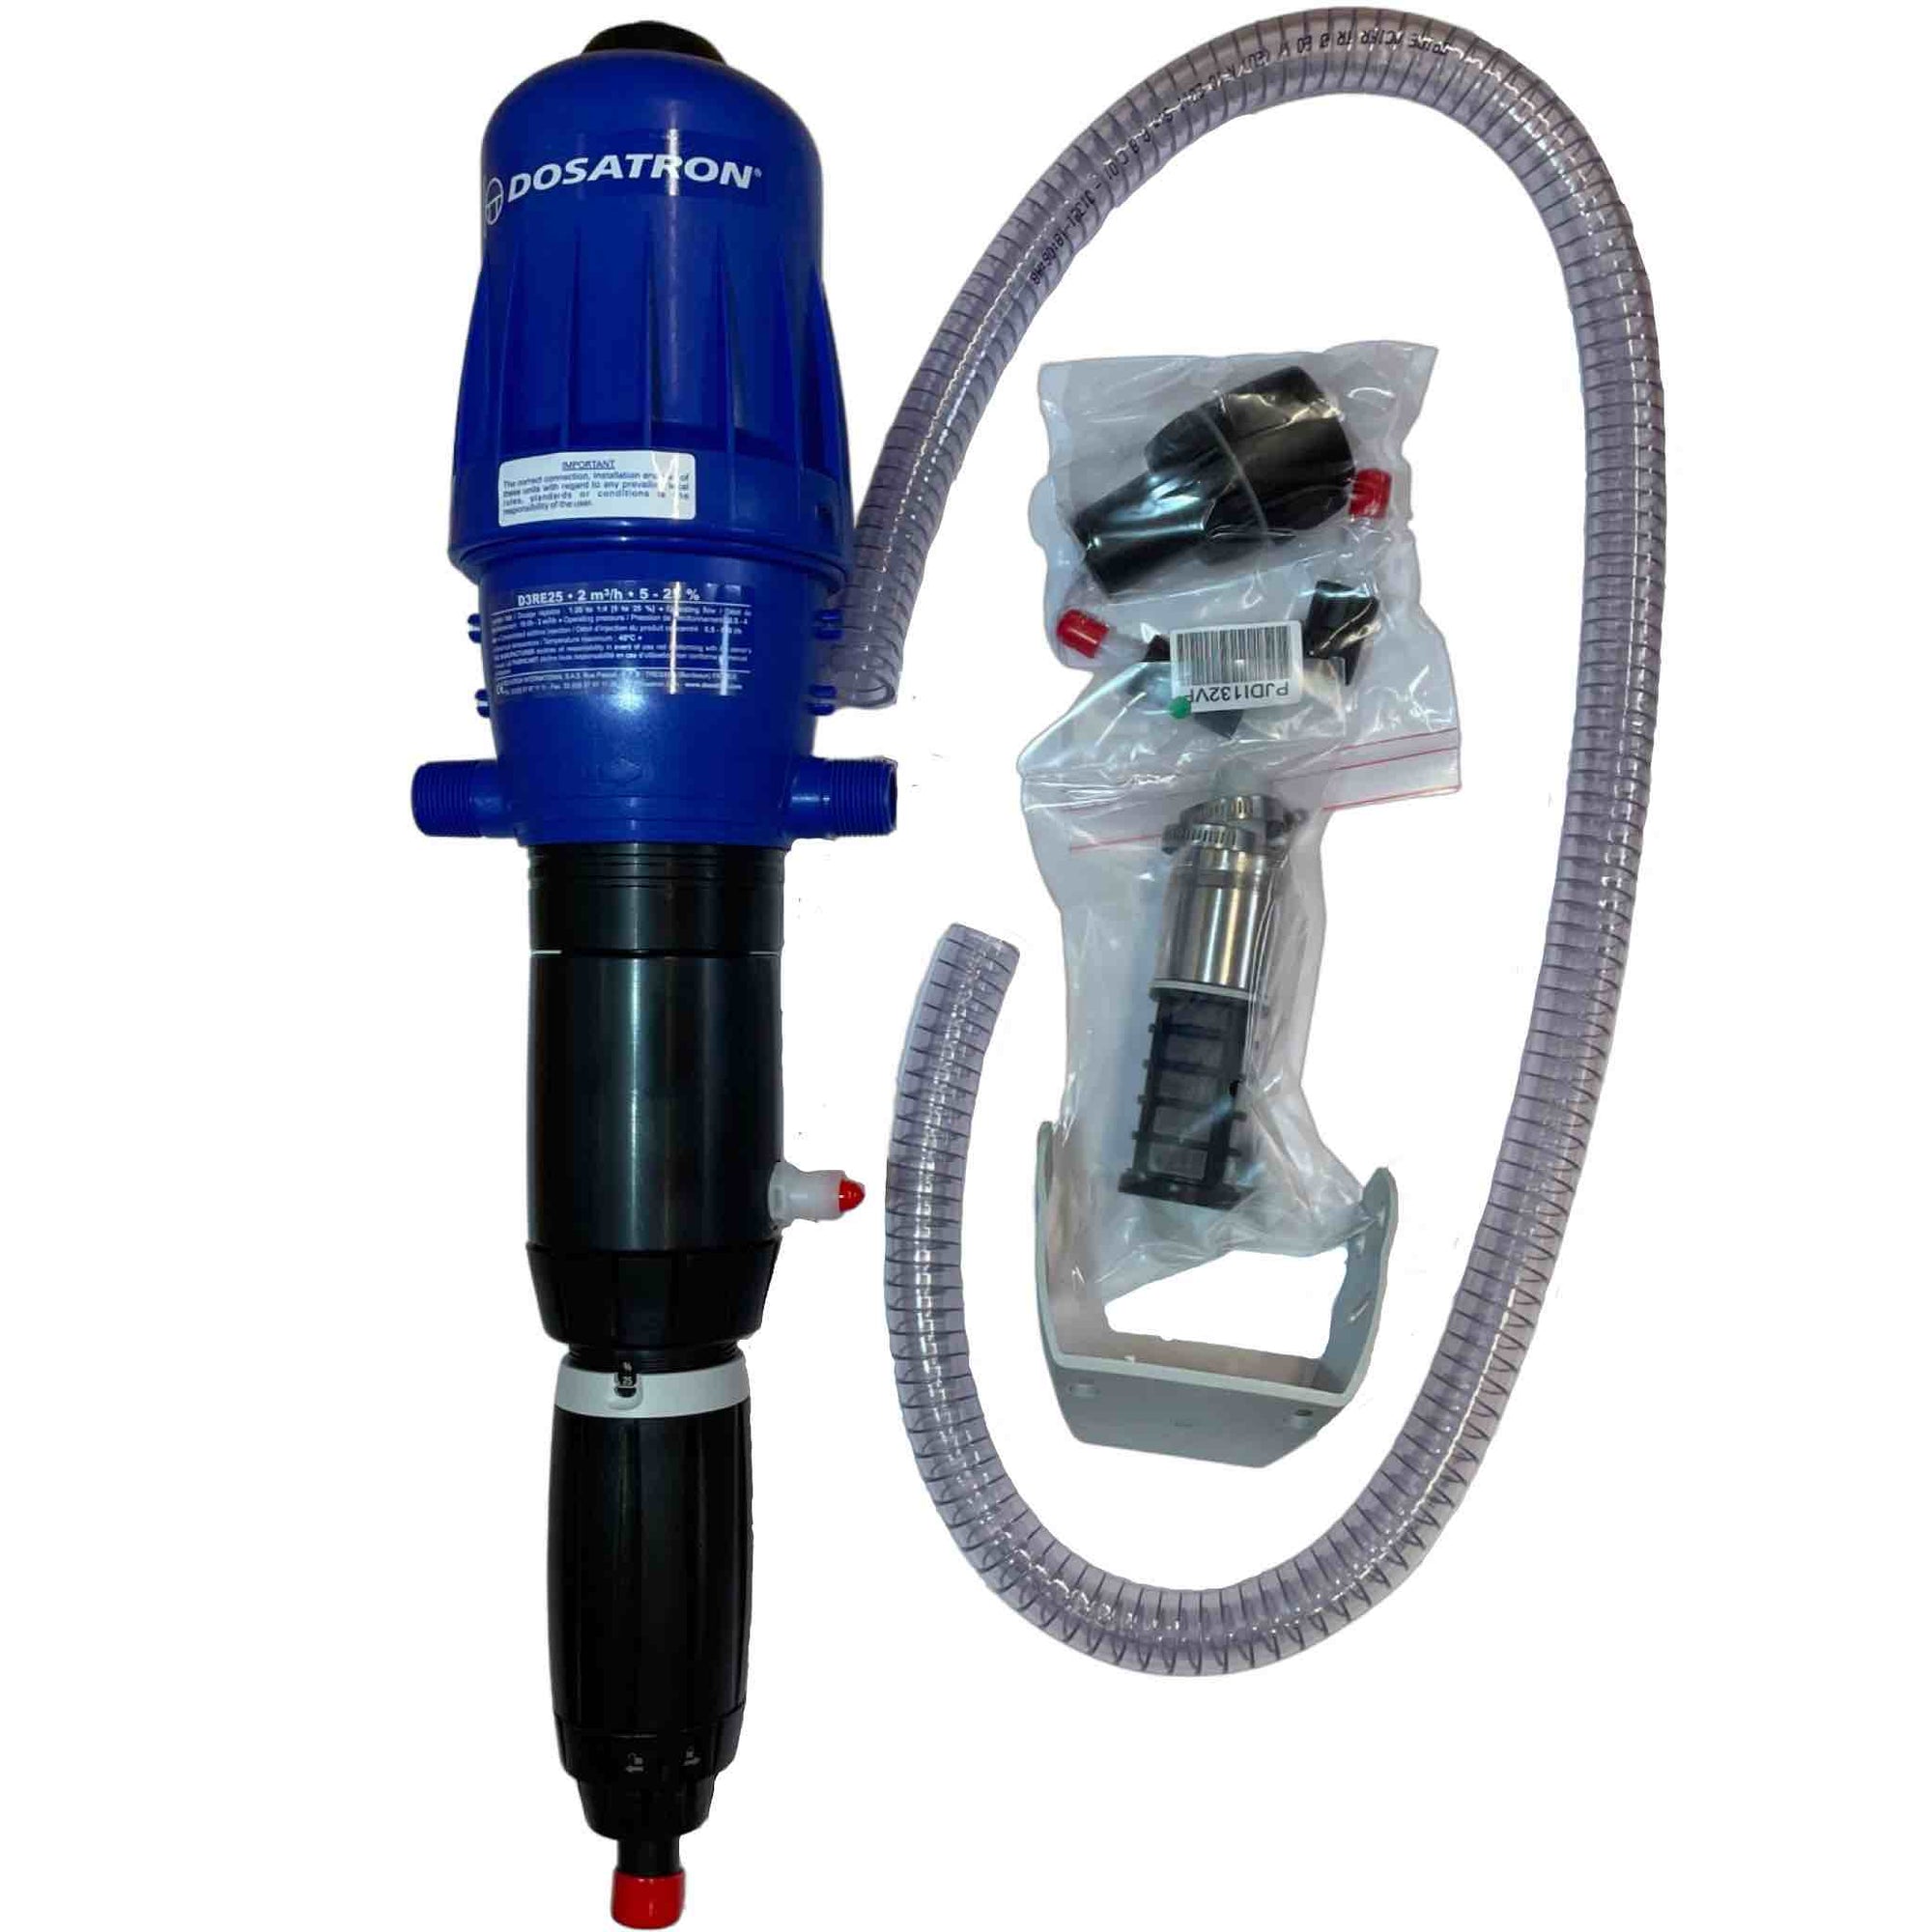 DOSATRON D3RE25 - Water powered chemical injector for diluting Lighting Cleanze - 4:1 – 25:1 dilution.